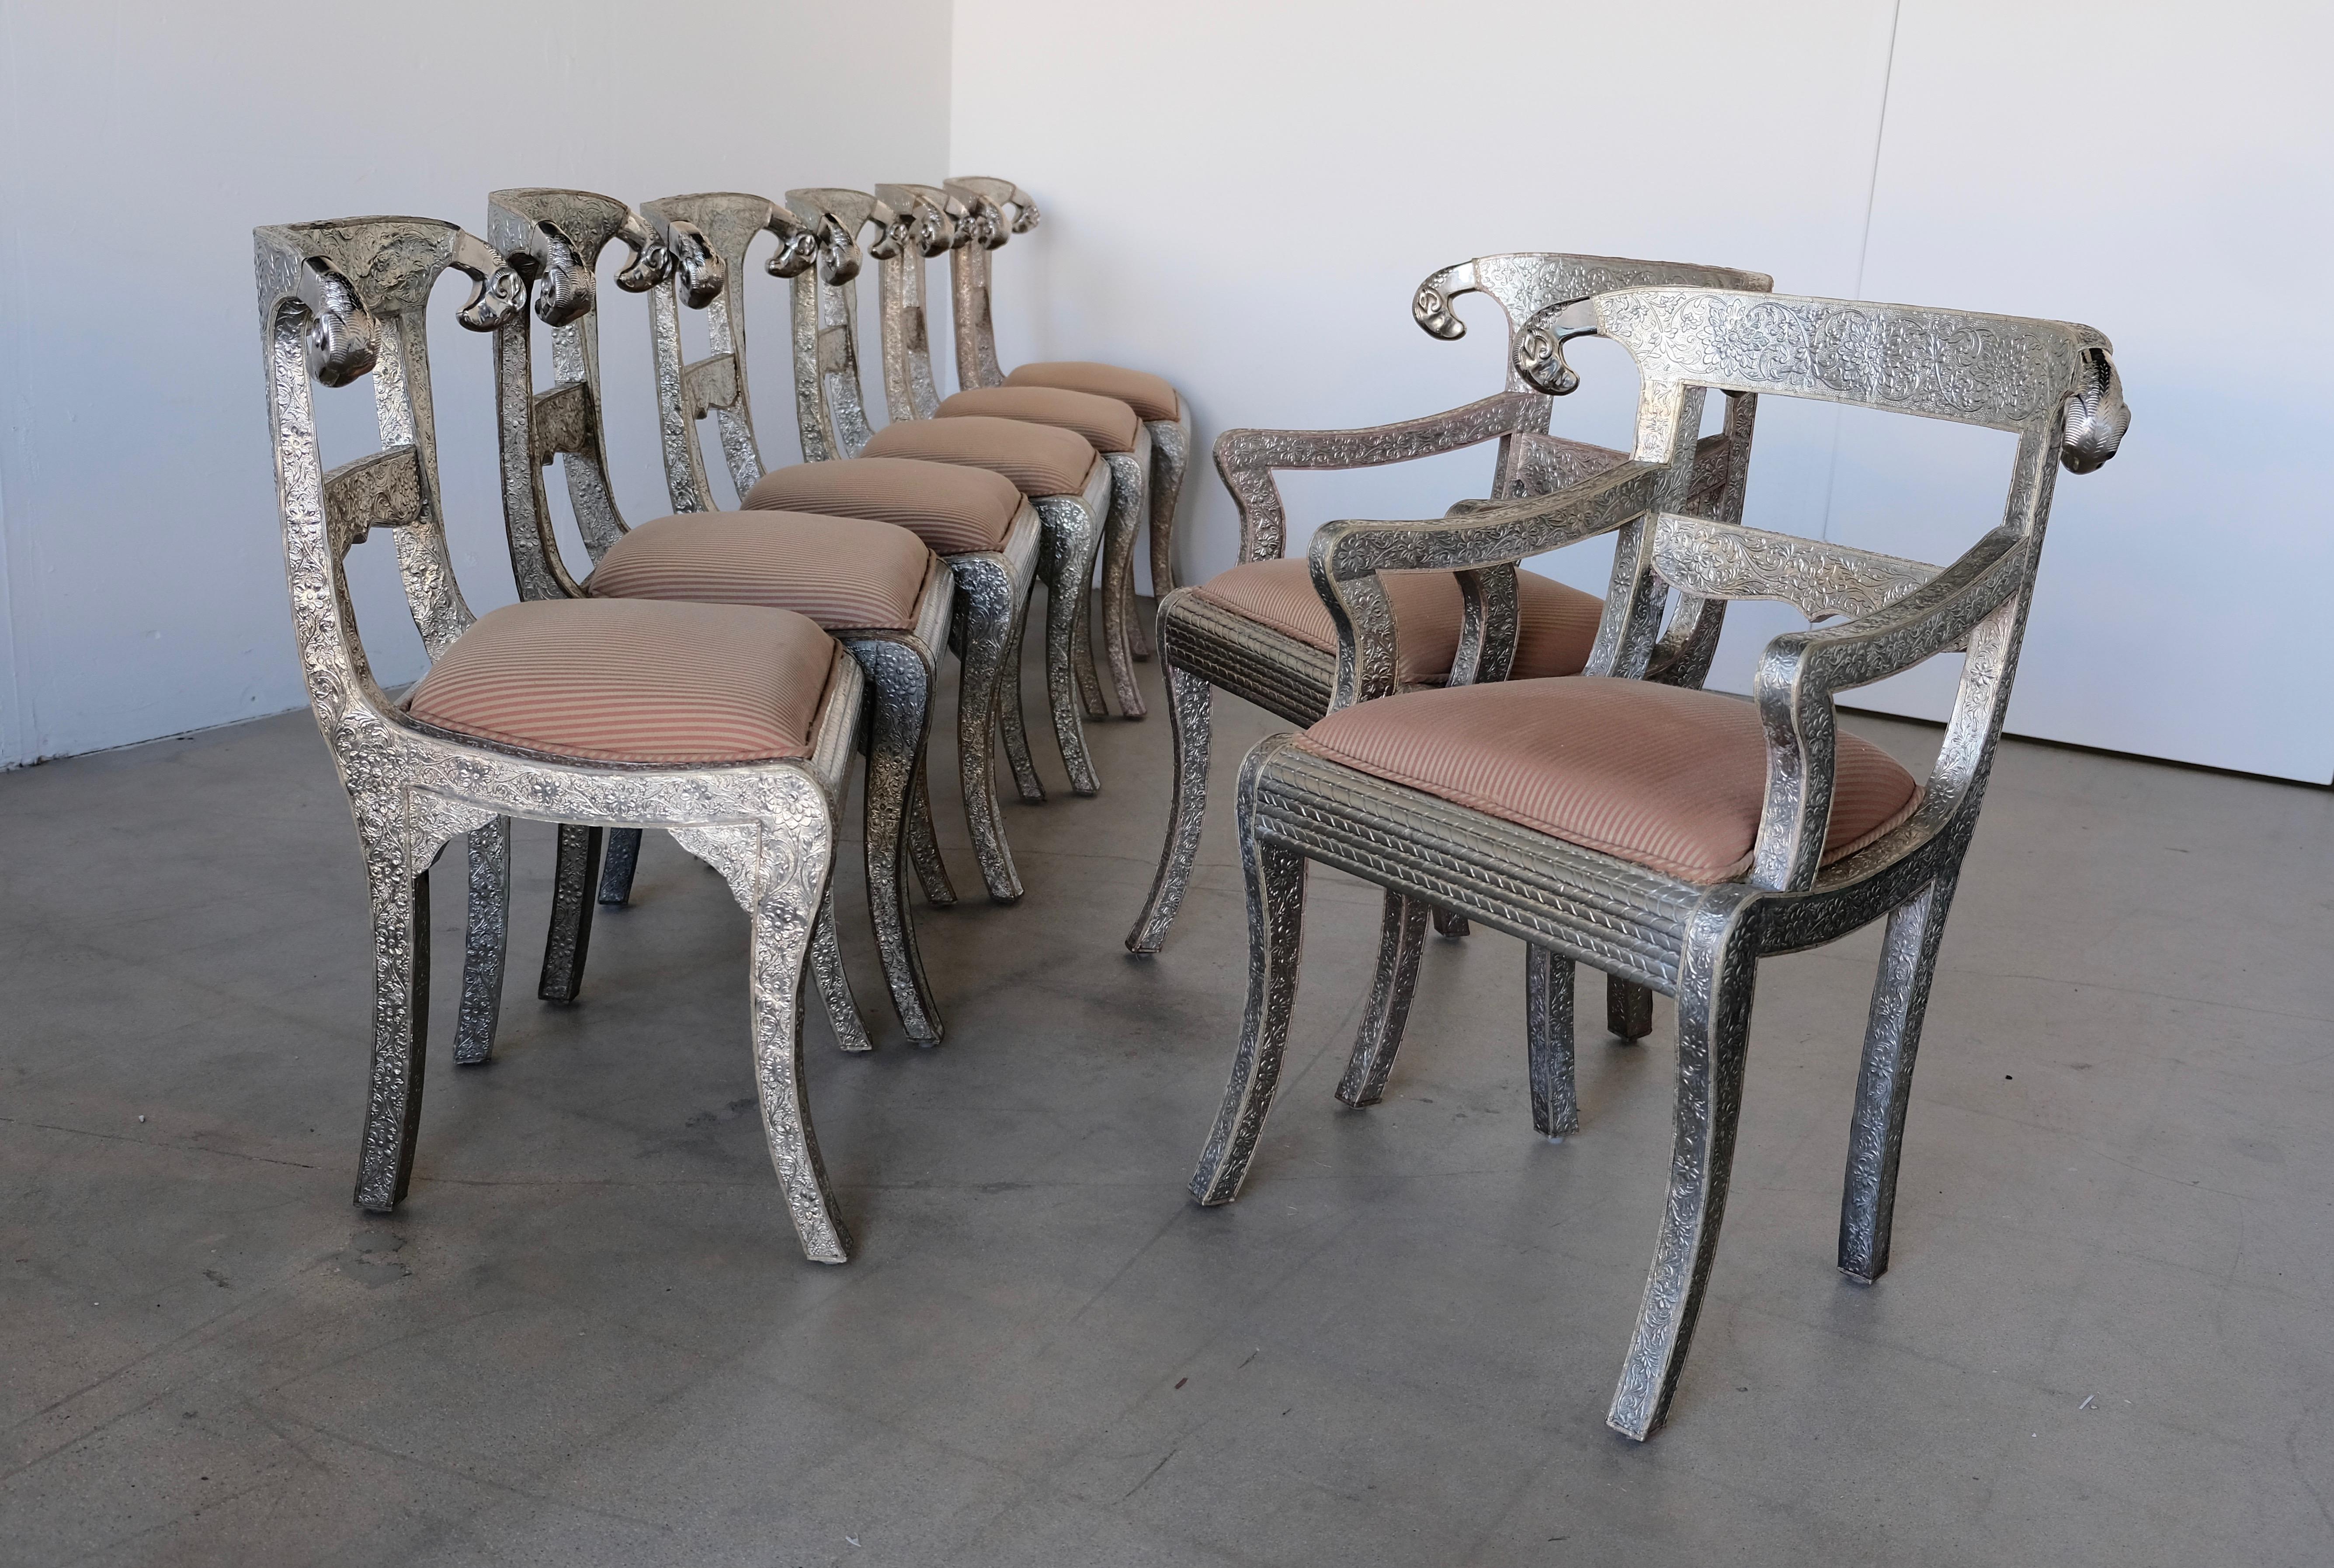 A set of eight Anglo-Indian handmade dining chairs. The chairs are embossed metal over wood finished with curved decorative cast Rams heads. The set consists of six side chairs and two captains chairs with arms. The metal respoussé has a floral and